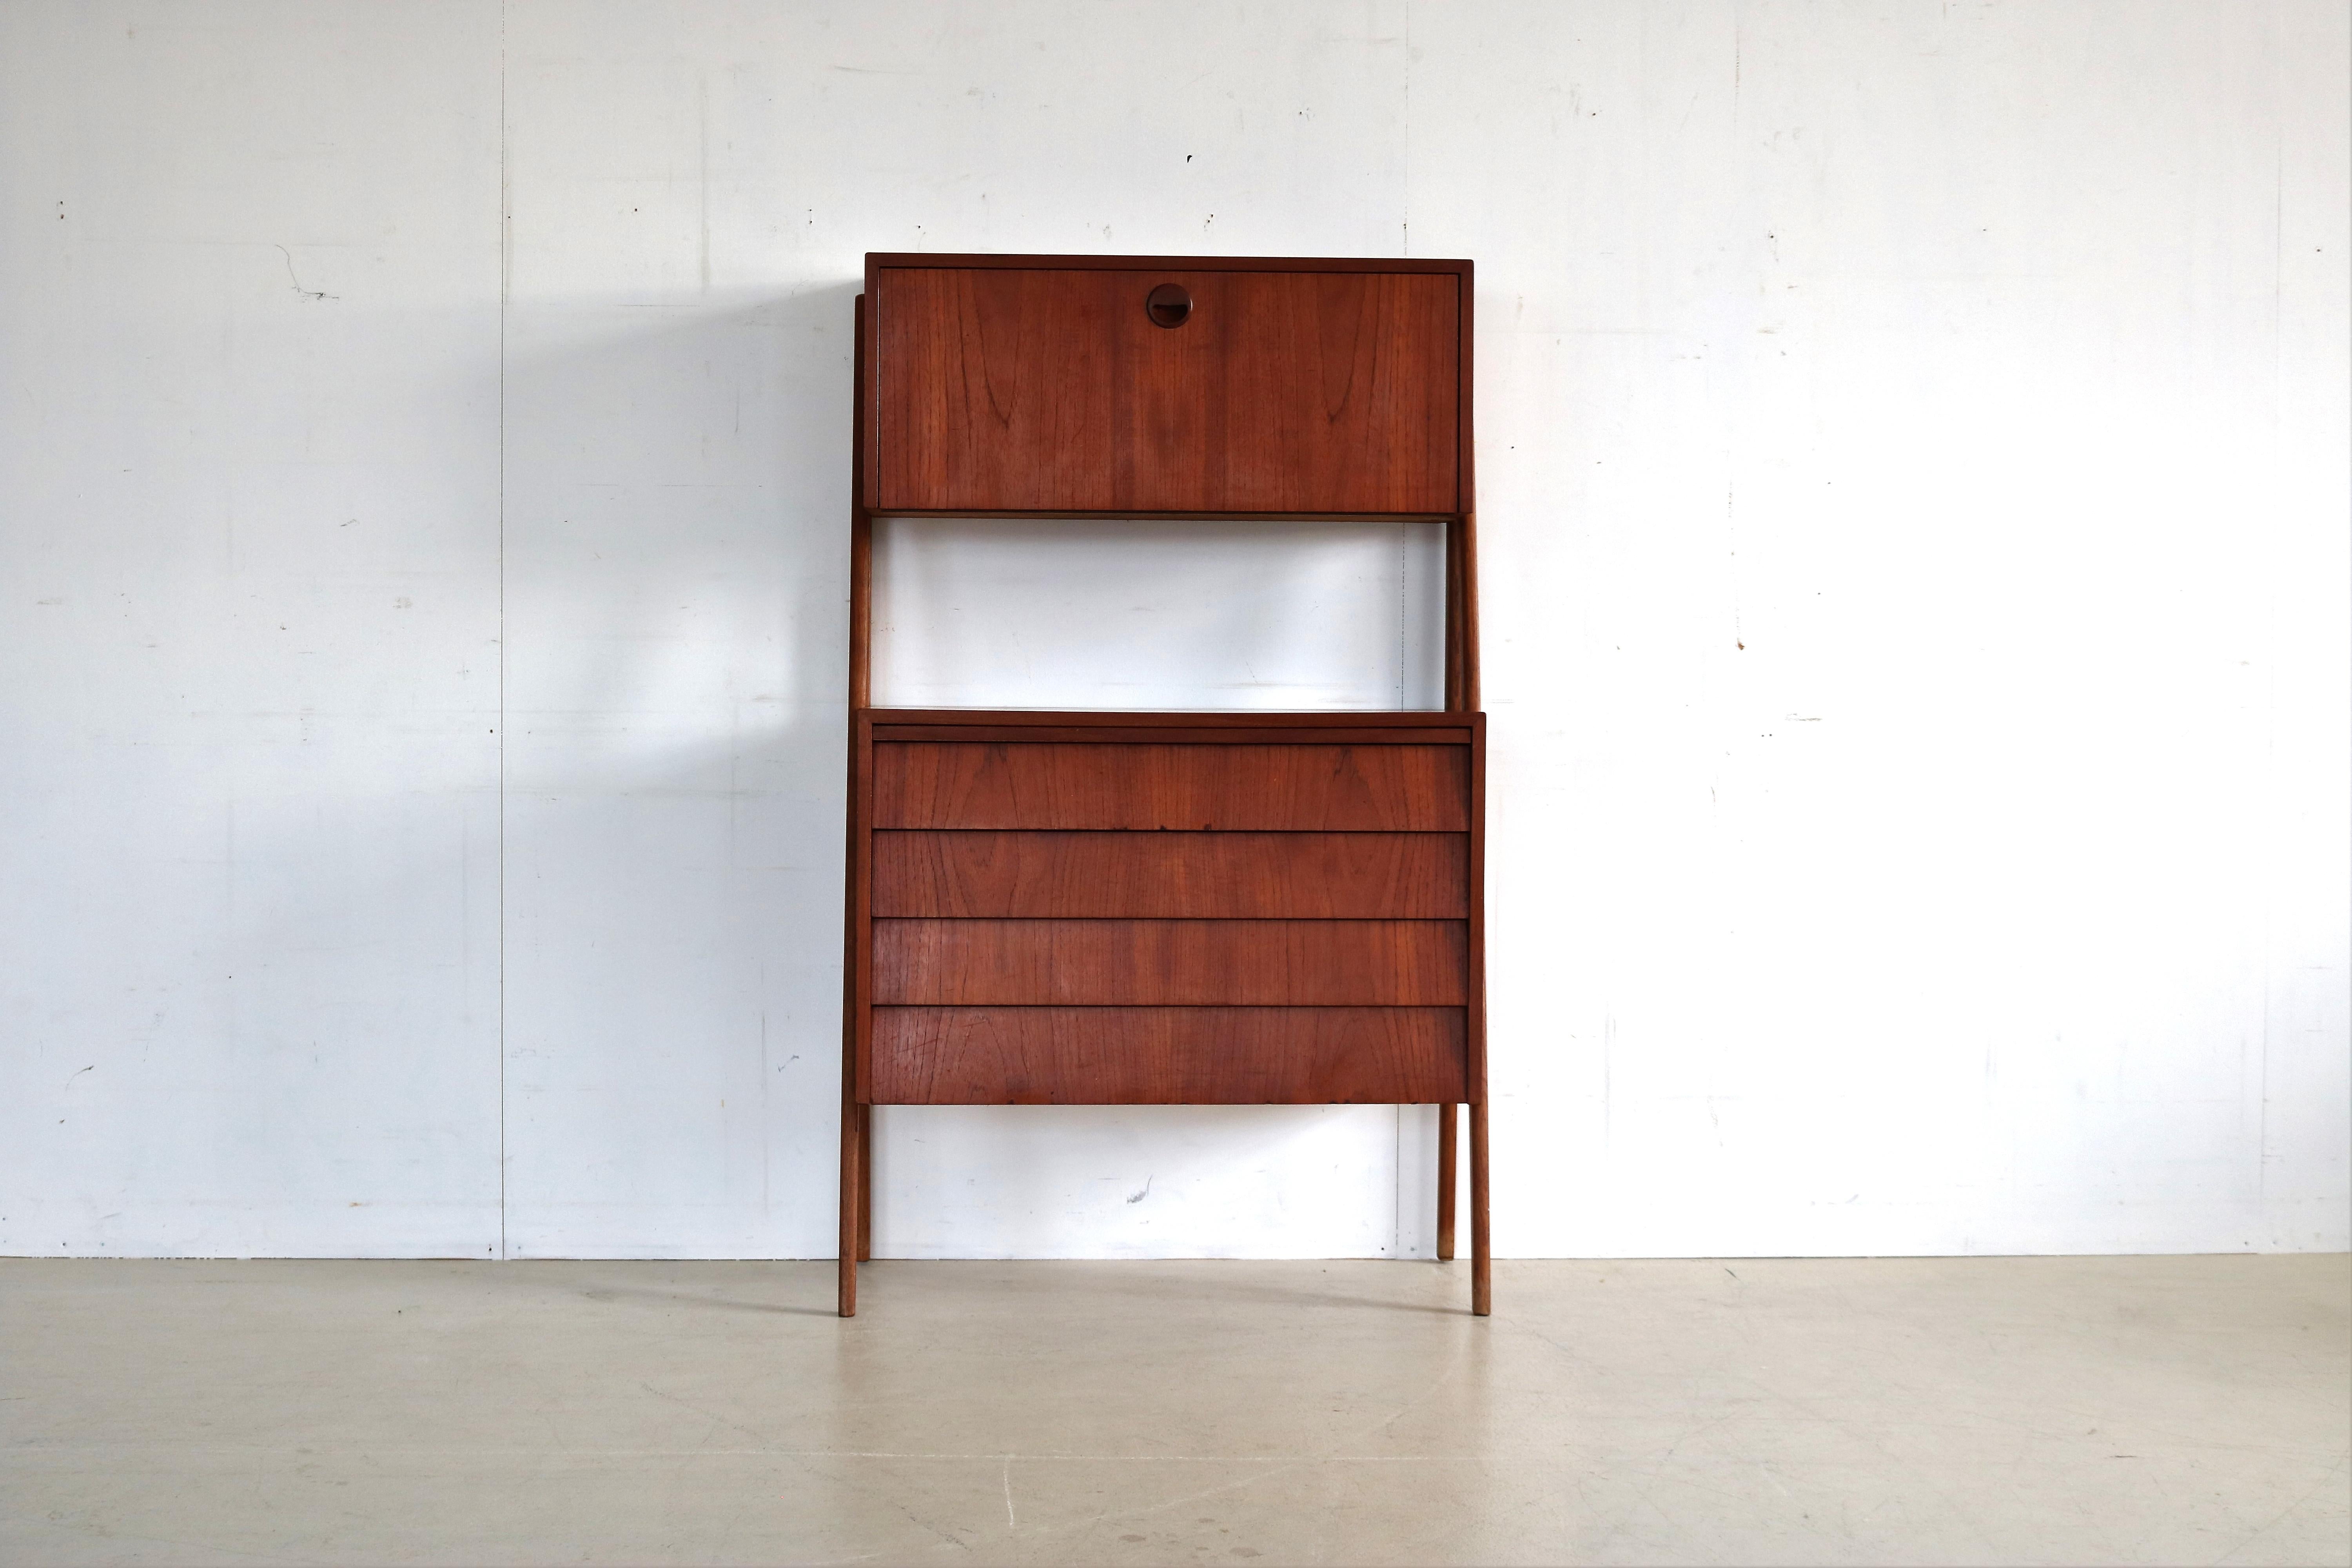 vintage secretary wall cabinet teak, 1960s, Denmark

Multifunctional cabinet from the 1960s. This wall cabinet in teak version with oak legs can be used as a desk by means of an extendable worktop. Behind the opening flap is storage space with a